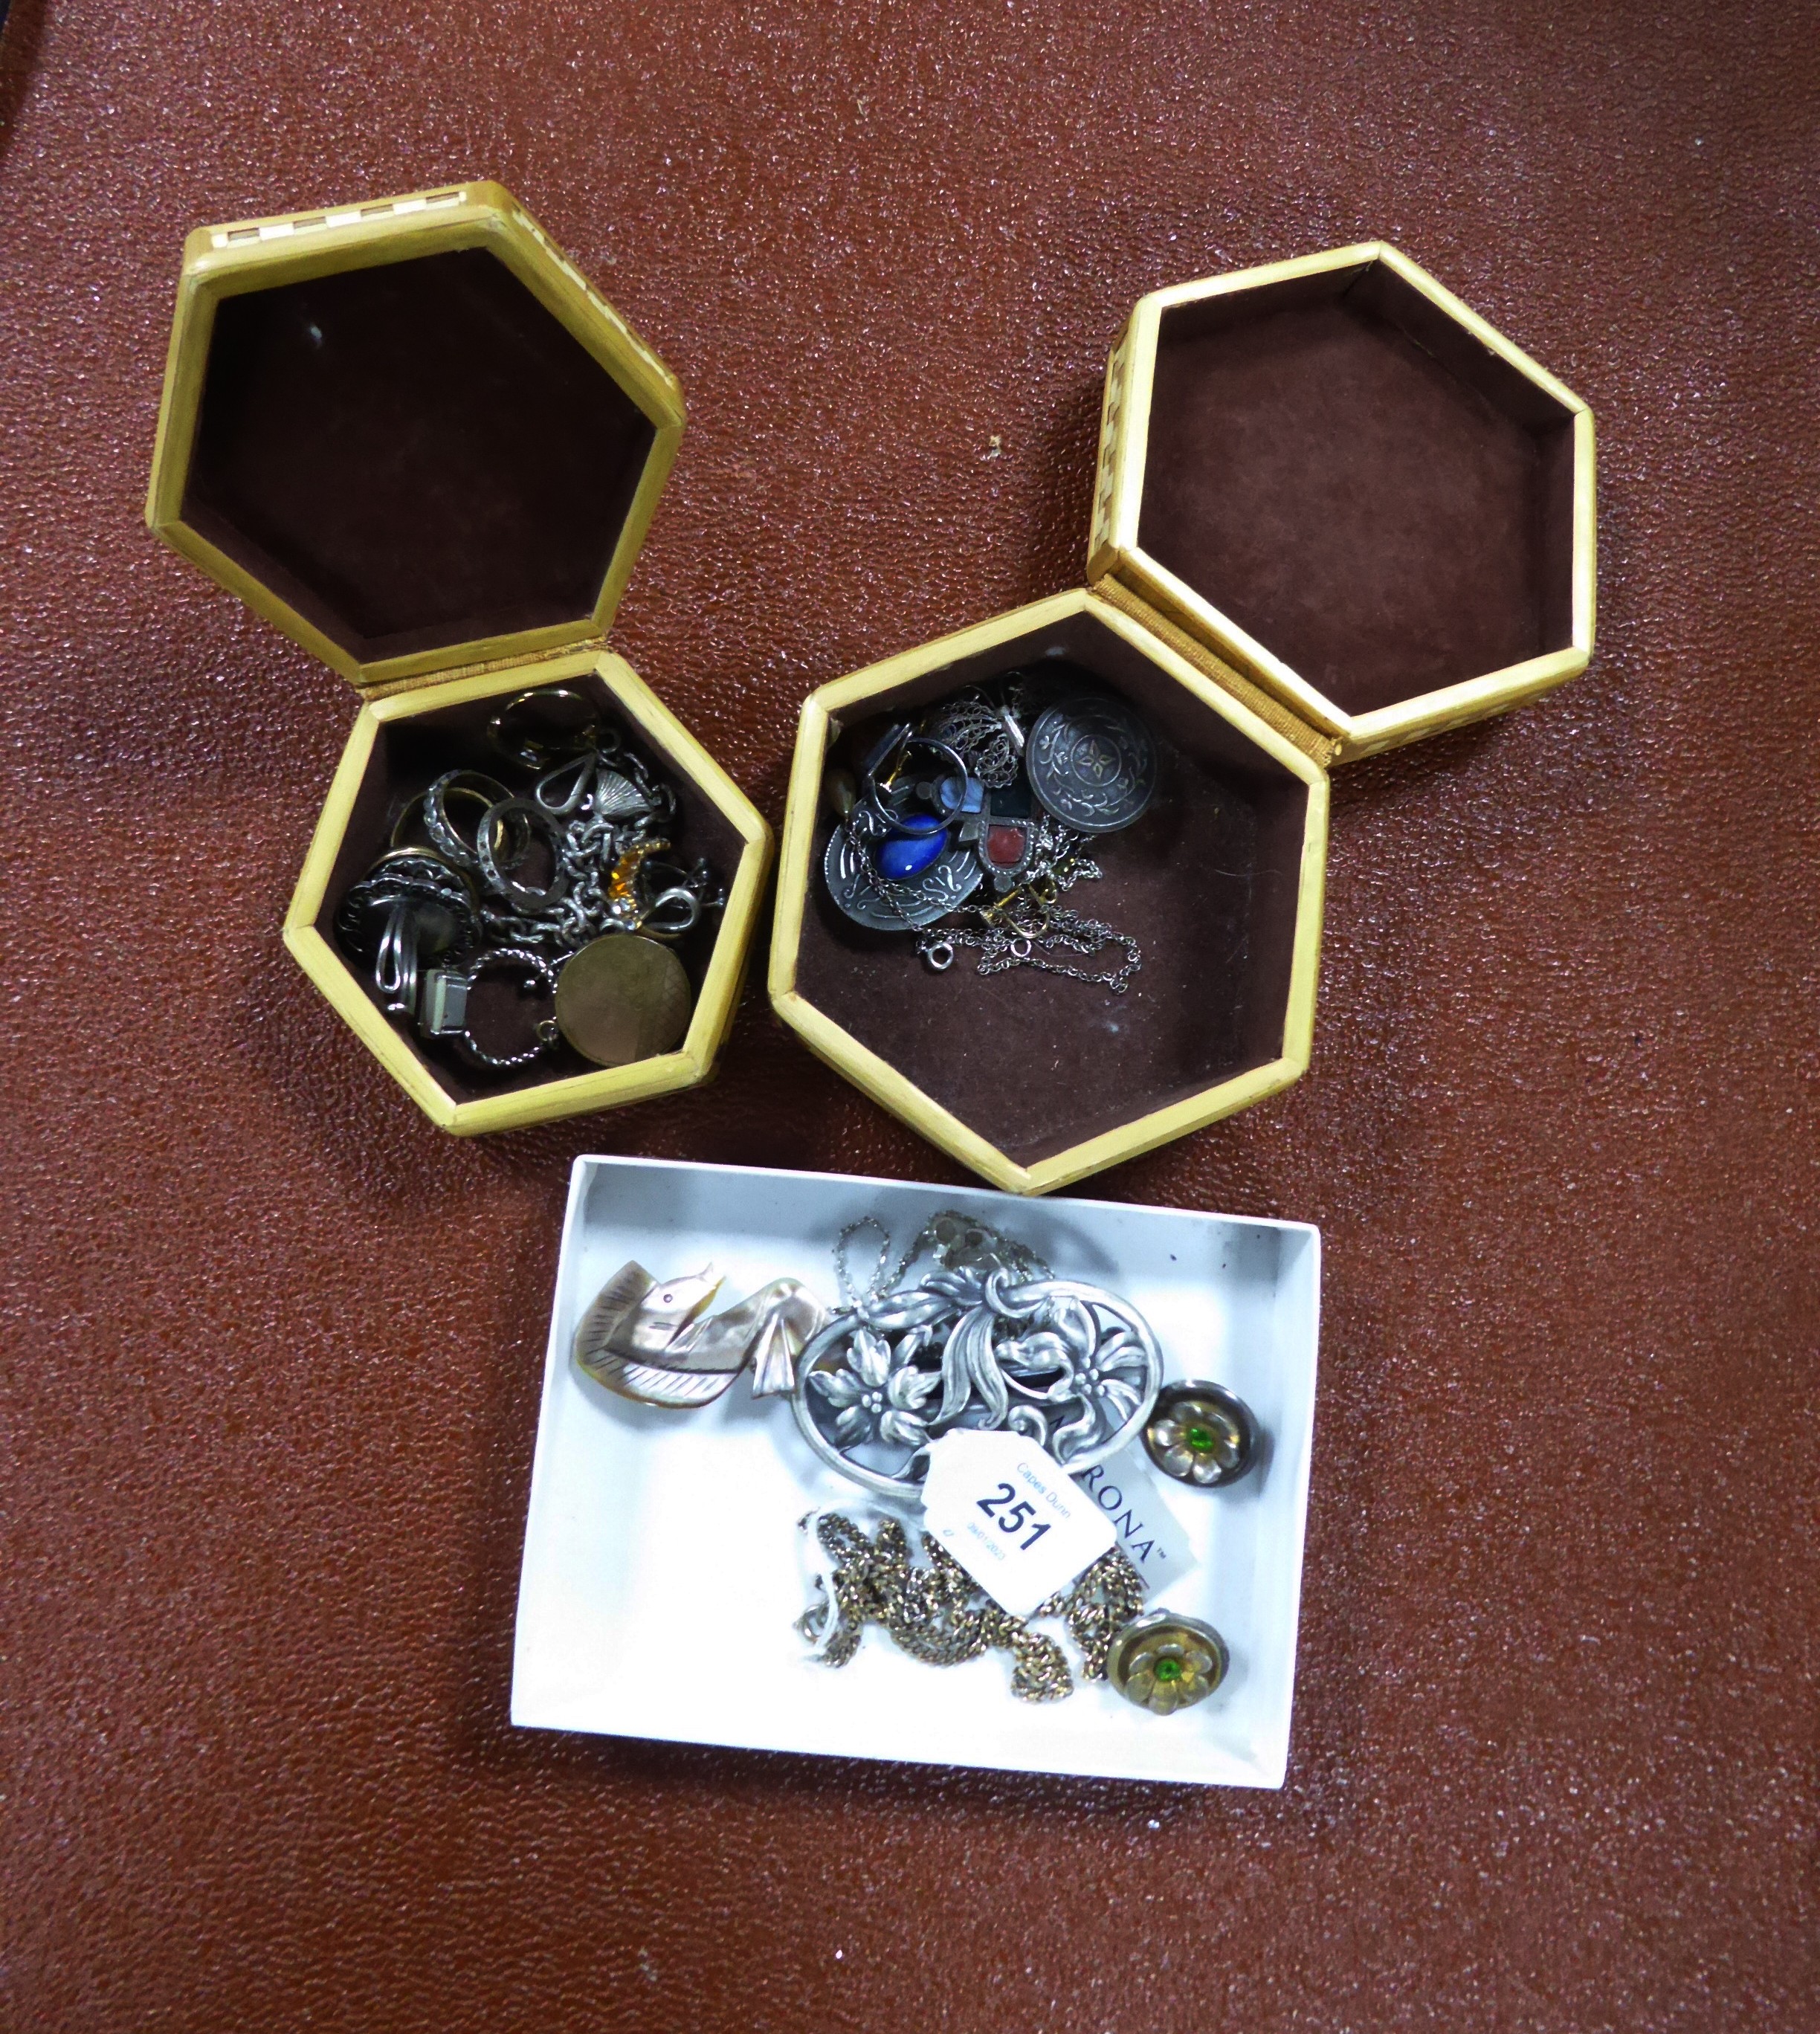 PAIR OF STERLING SILVER FLOWER PATTERN CLIP EARRINGS EACH SET WIHT A SMALL BLUE STONE; A GOLD PLATED